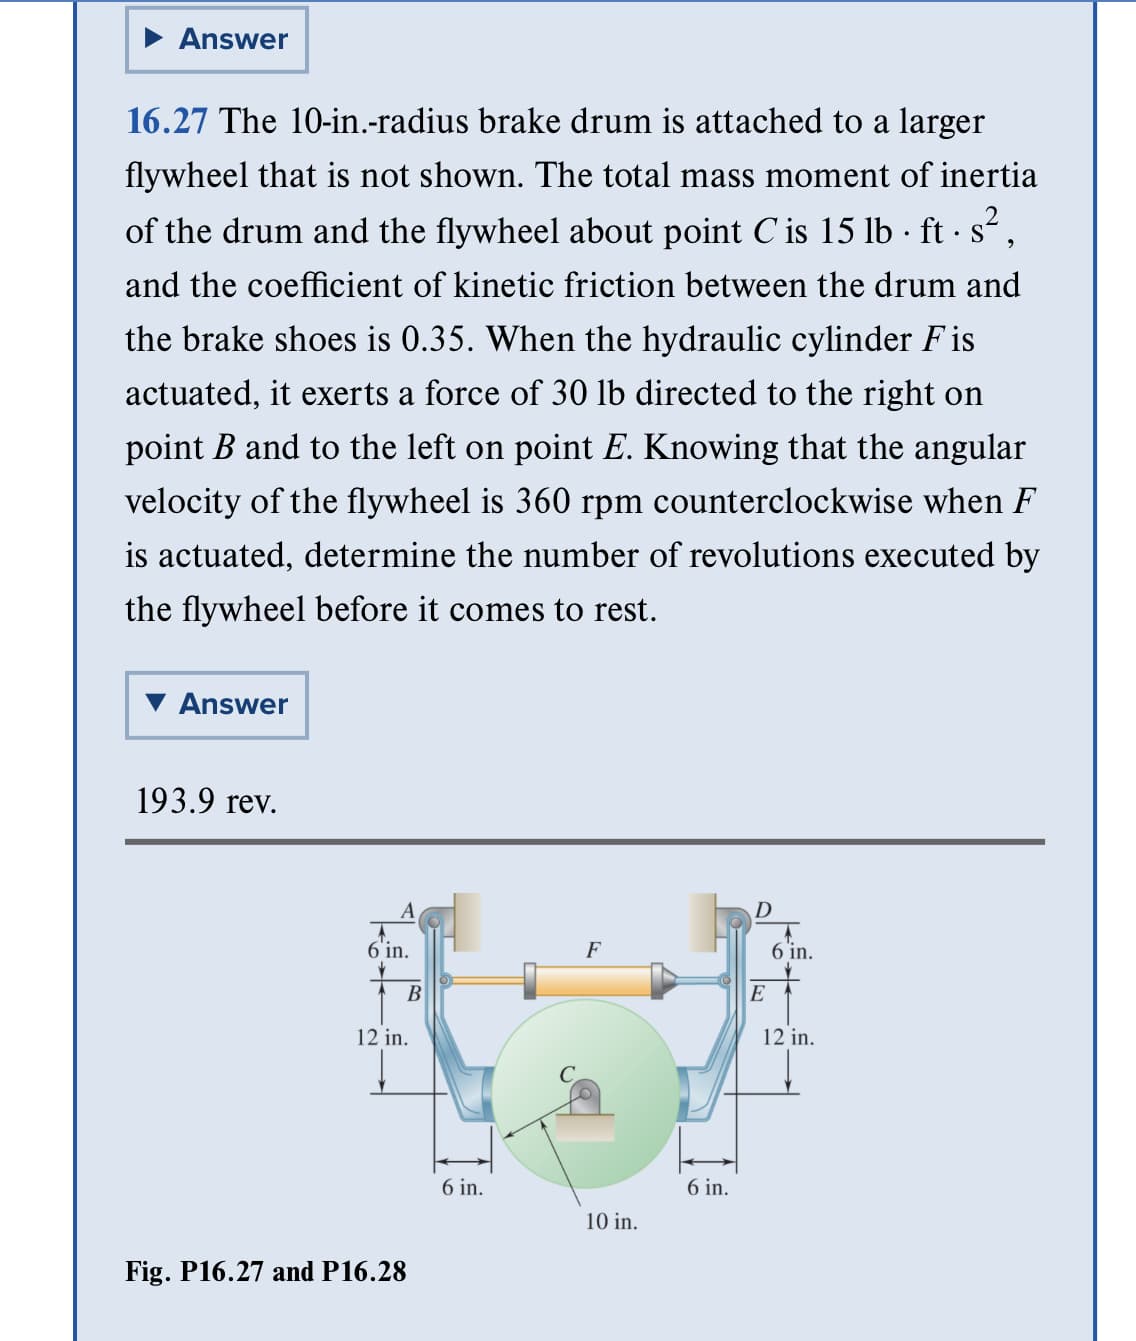 Answer
.
16.27 The 10-in.-radius brake drum is attached to a larger
flywheel that is not shown. The total mass moment of inertia
of the drum and the flywheel about point C' is 15 lb · ft · s²,
and the coefficient of kinetic friction between the drum and
the brake shoes is 0.35. When the hydraulic cylinder Fis
actuated, it exerts a force of 30 lb directed to the right on
point B and to the left on point E. Knowing that the angular
velocity of the flywheel is 360 rpm counterclockwise when F
is actuated, determine the number of revolutions executed by
the flywheel before it comes to rest.
Answer
193.9 rev.
A
6'in.
B
12 in.
Fig. P16.27 and P16.28
6 in.
F
10 in.
6 in.
D
E
6 in.
12 in.